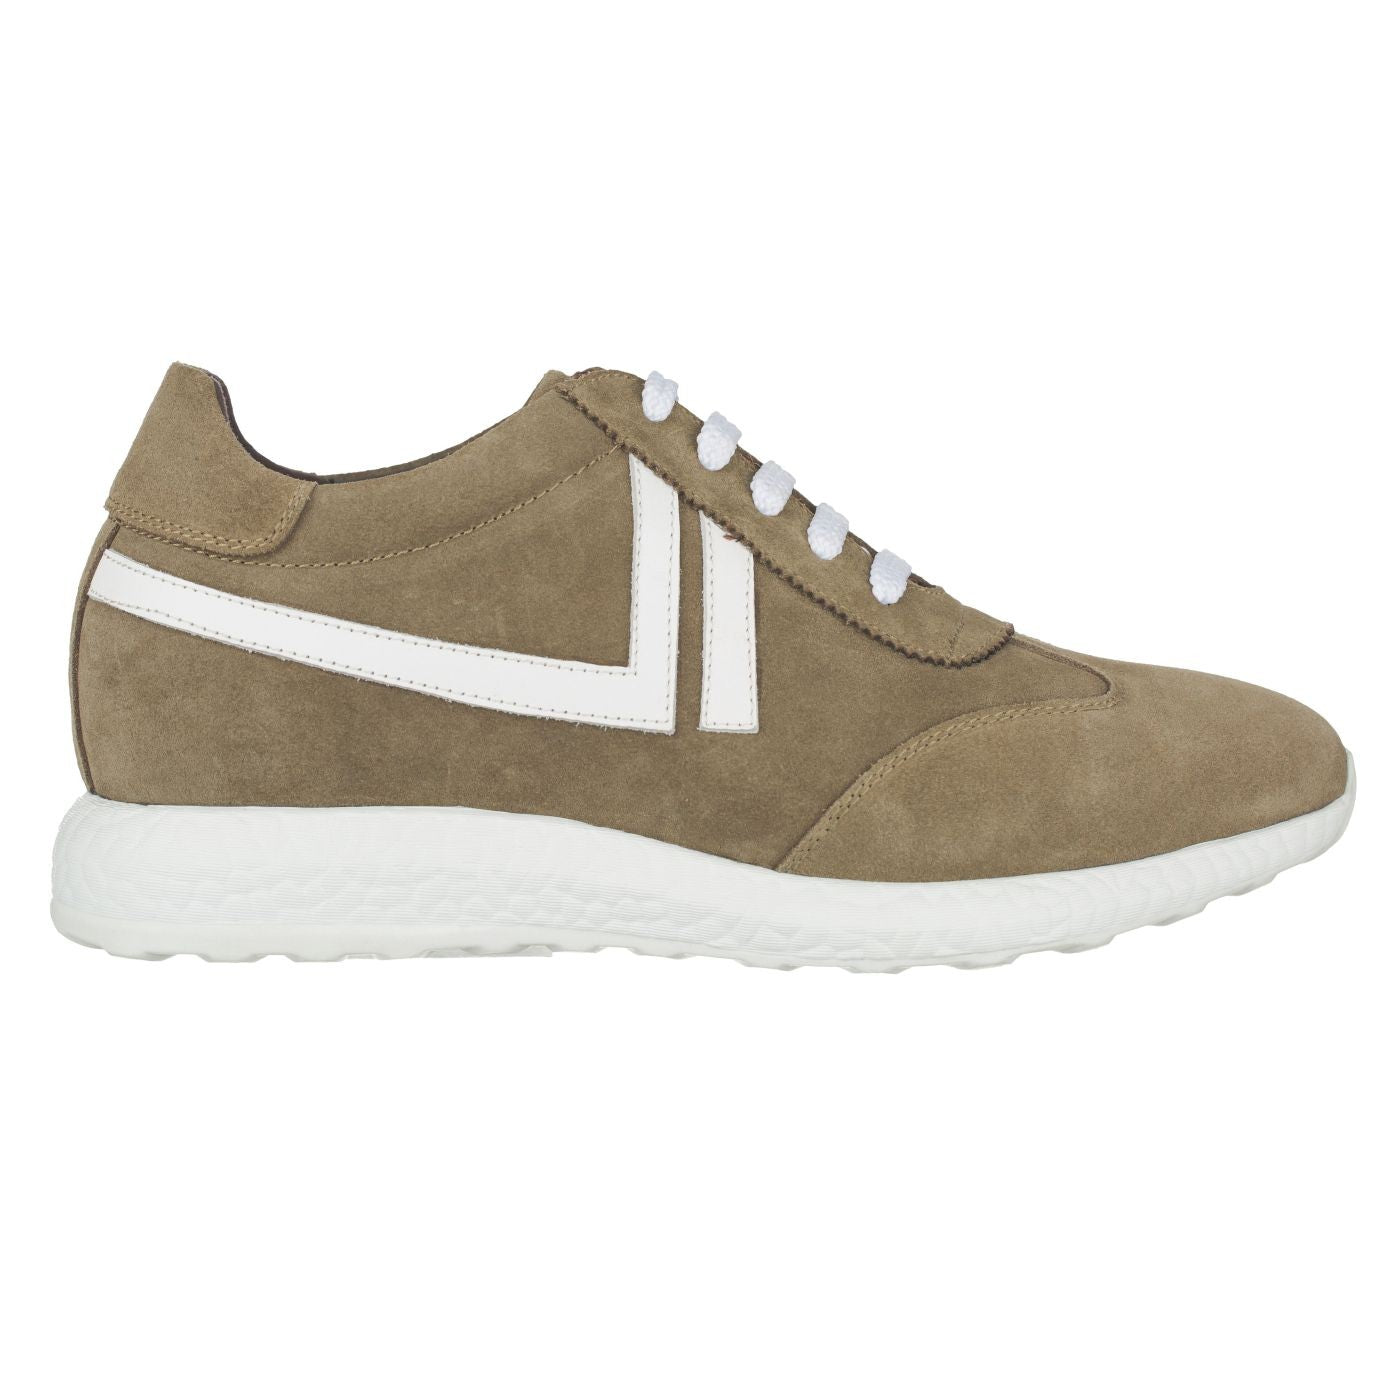 Elevator shoes height increase CALTO Khaki Men's Elevator Sneakers - 2.8 Inches - S2093